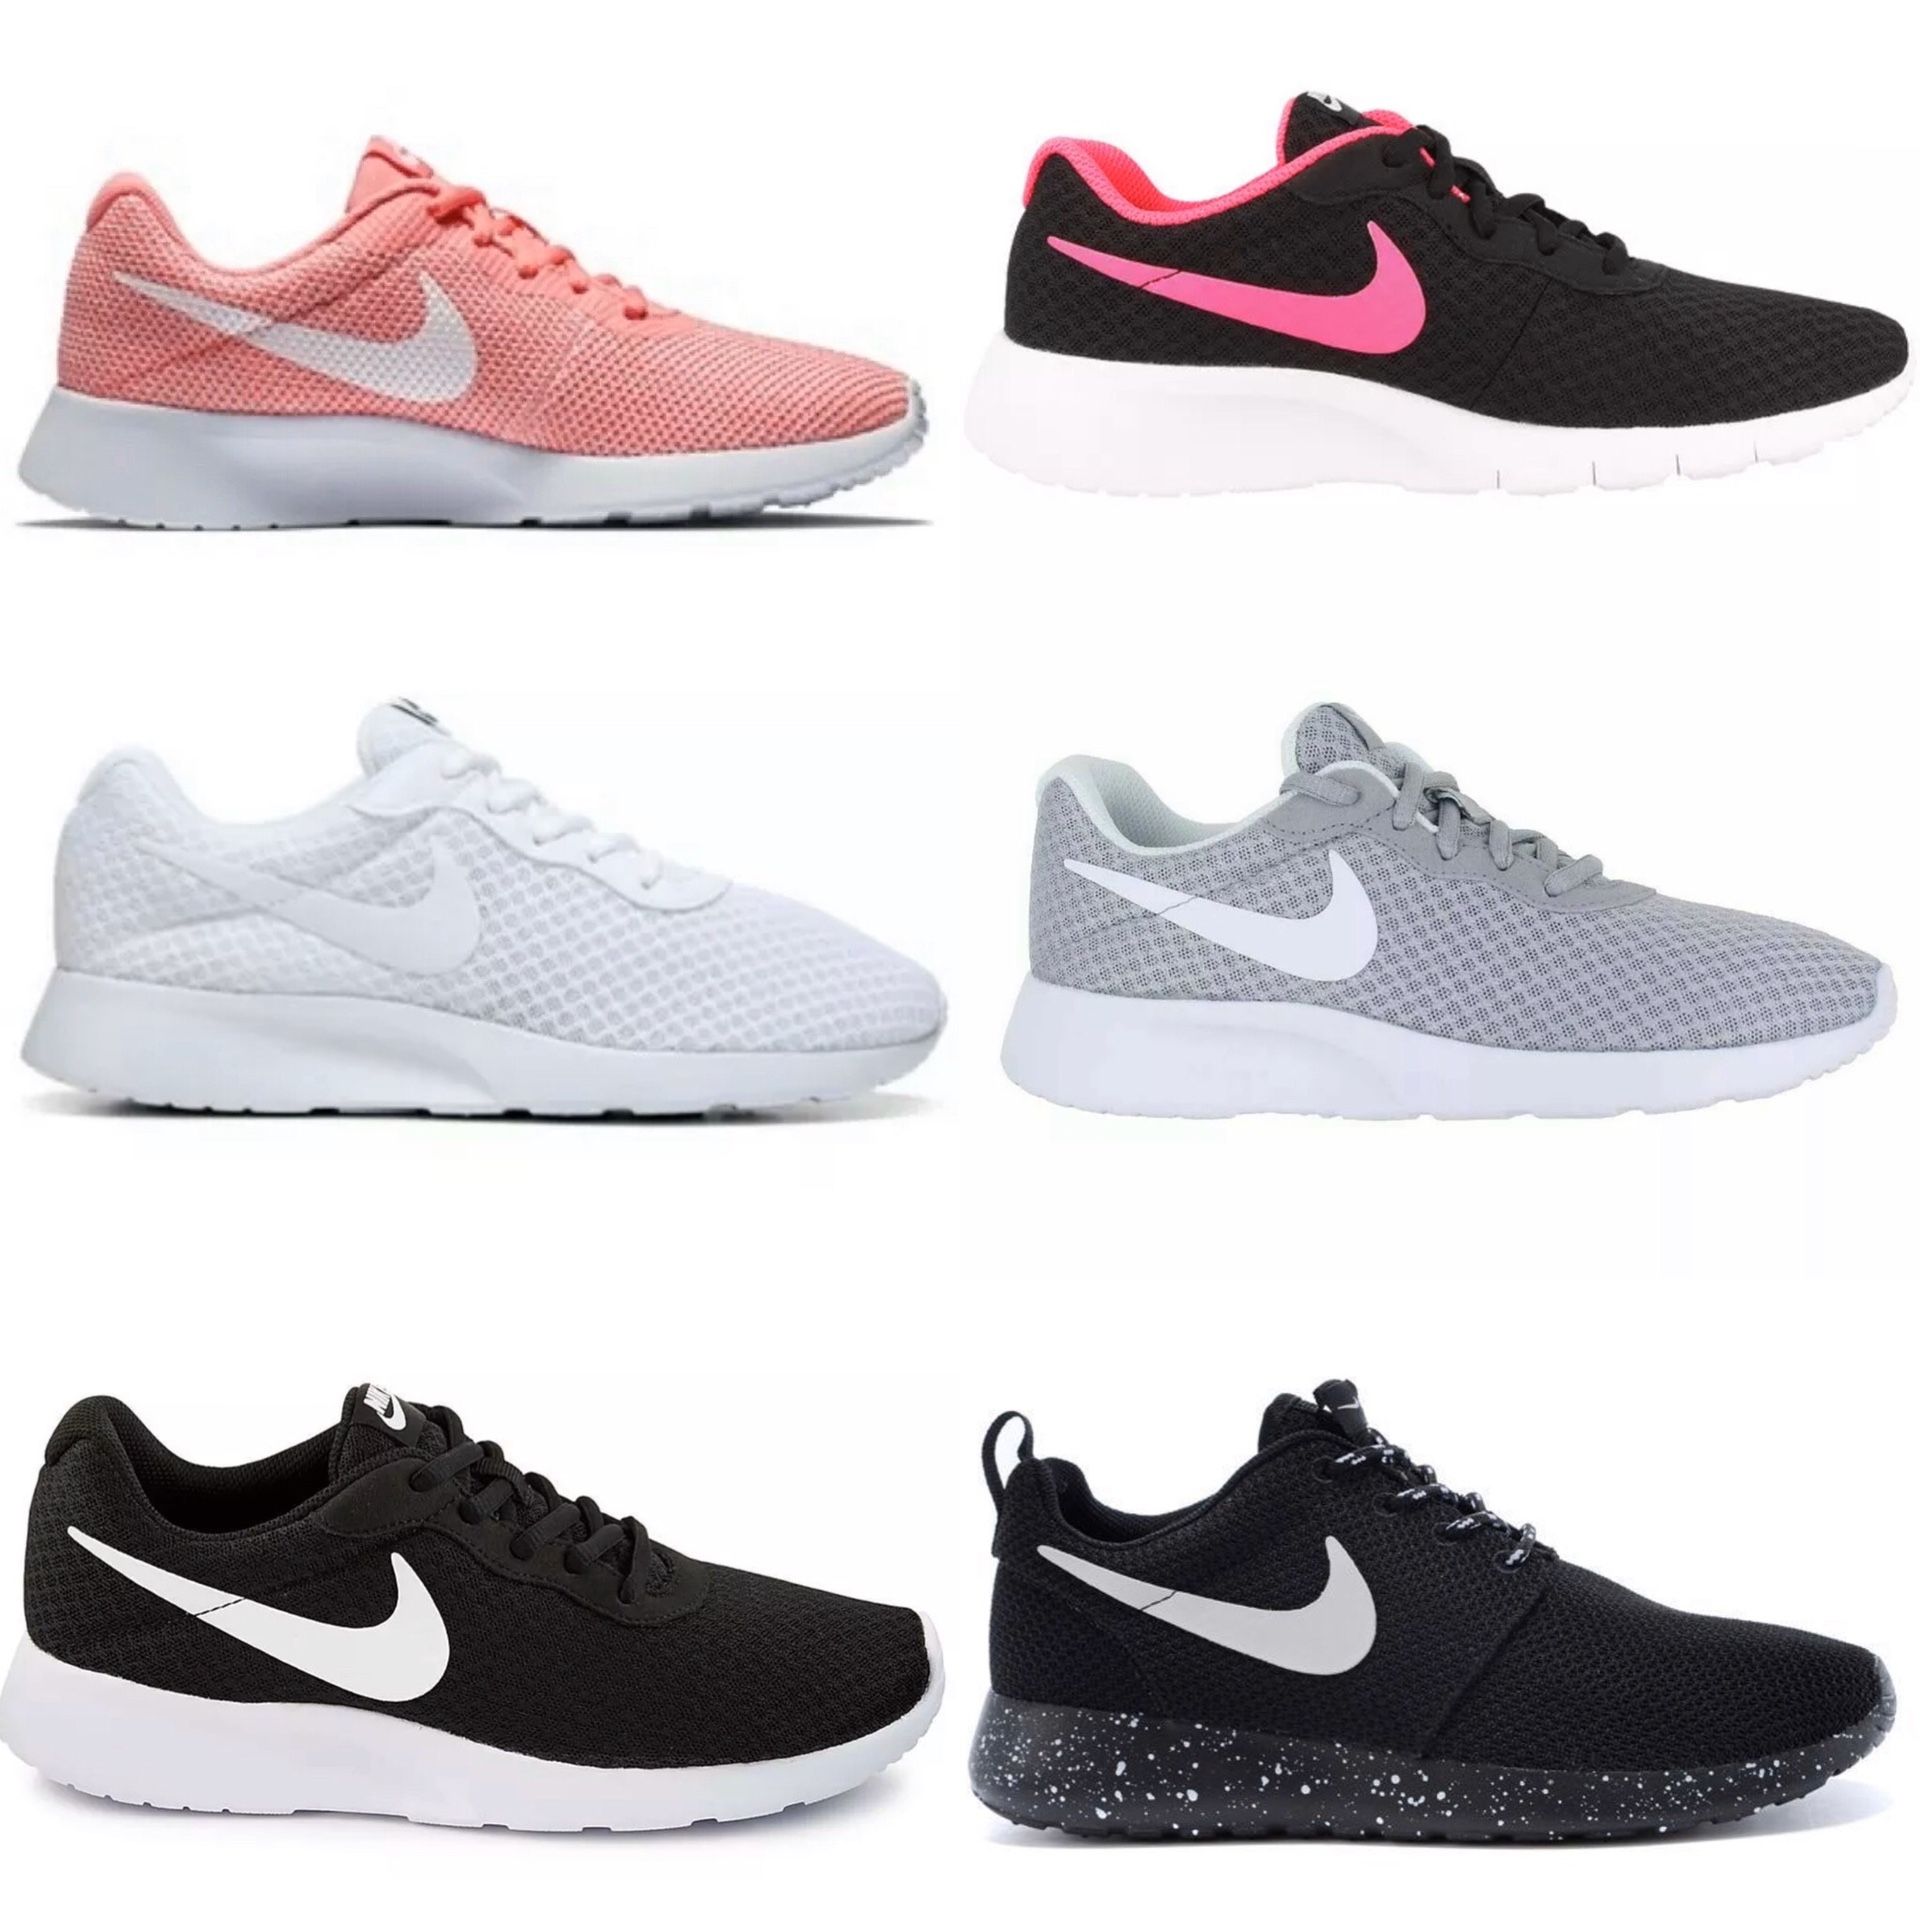 Brand New Women’s Tanjun Nike Shoes Various colors and sizes